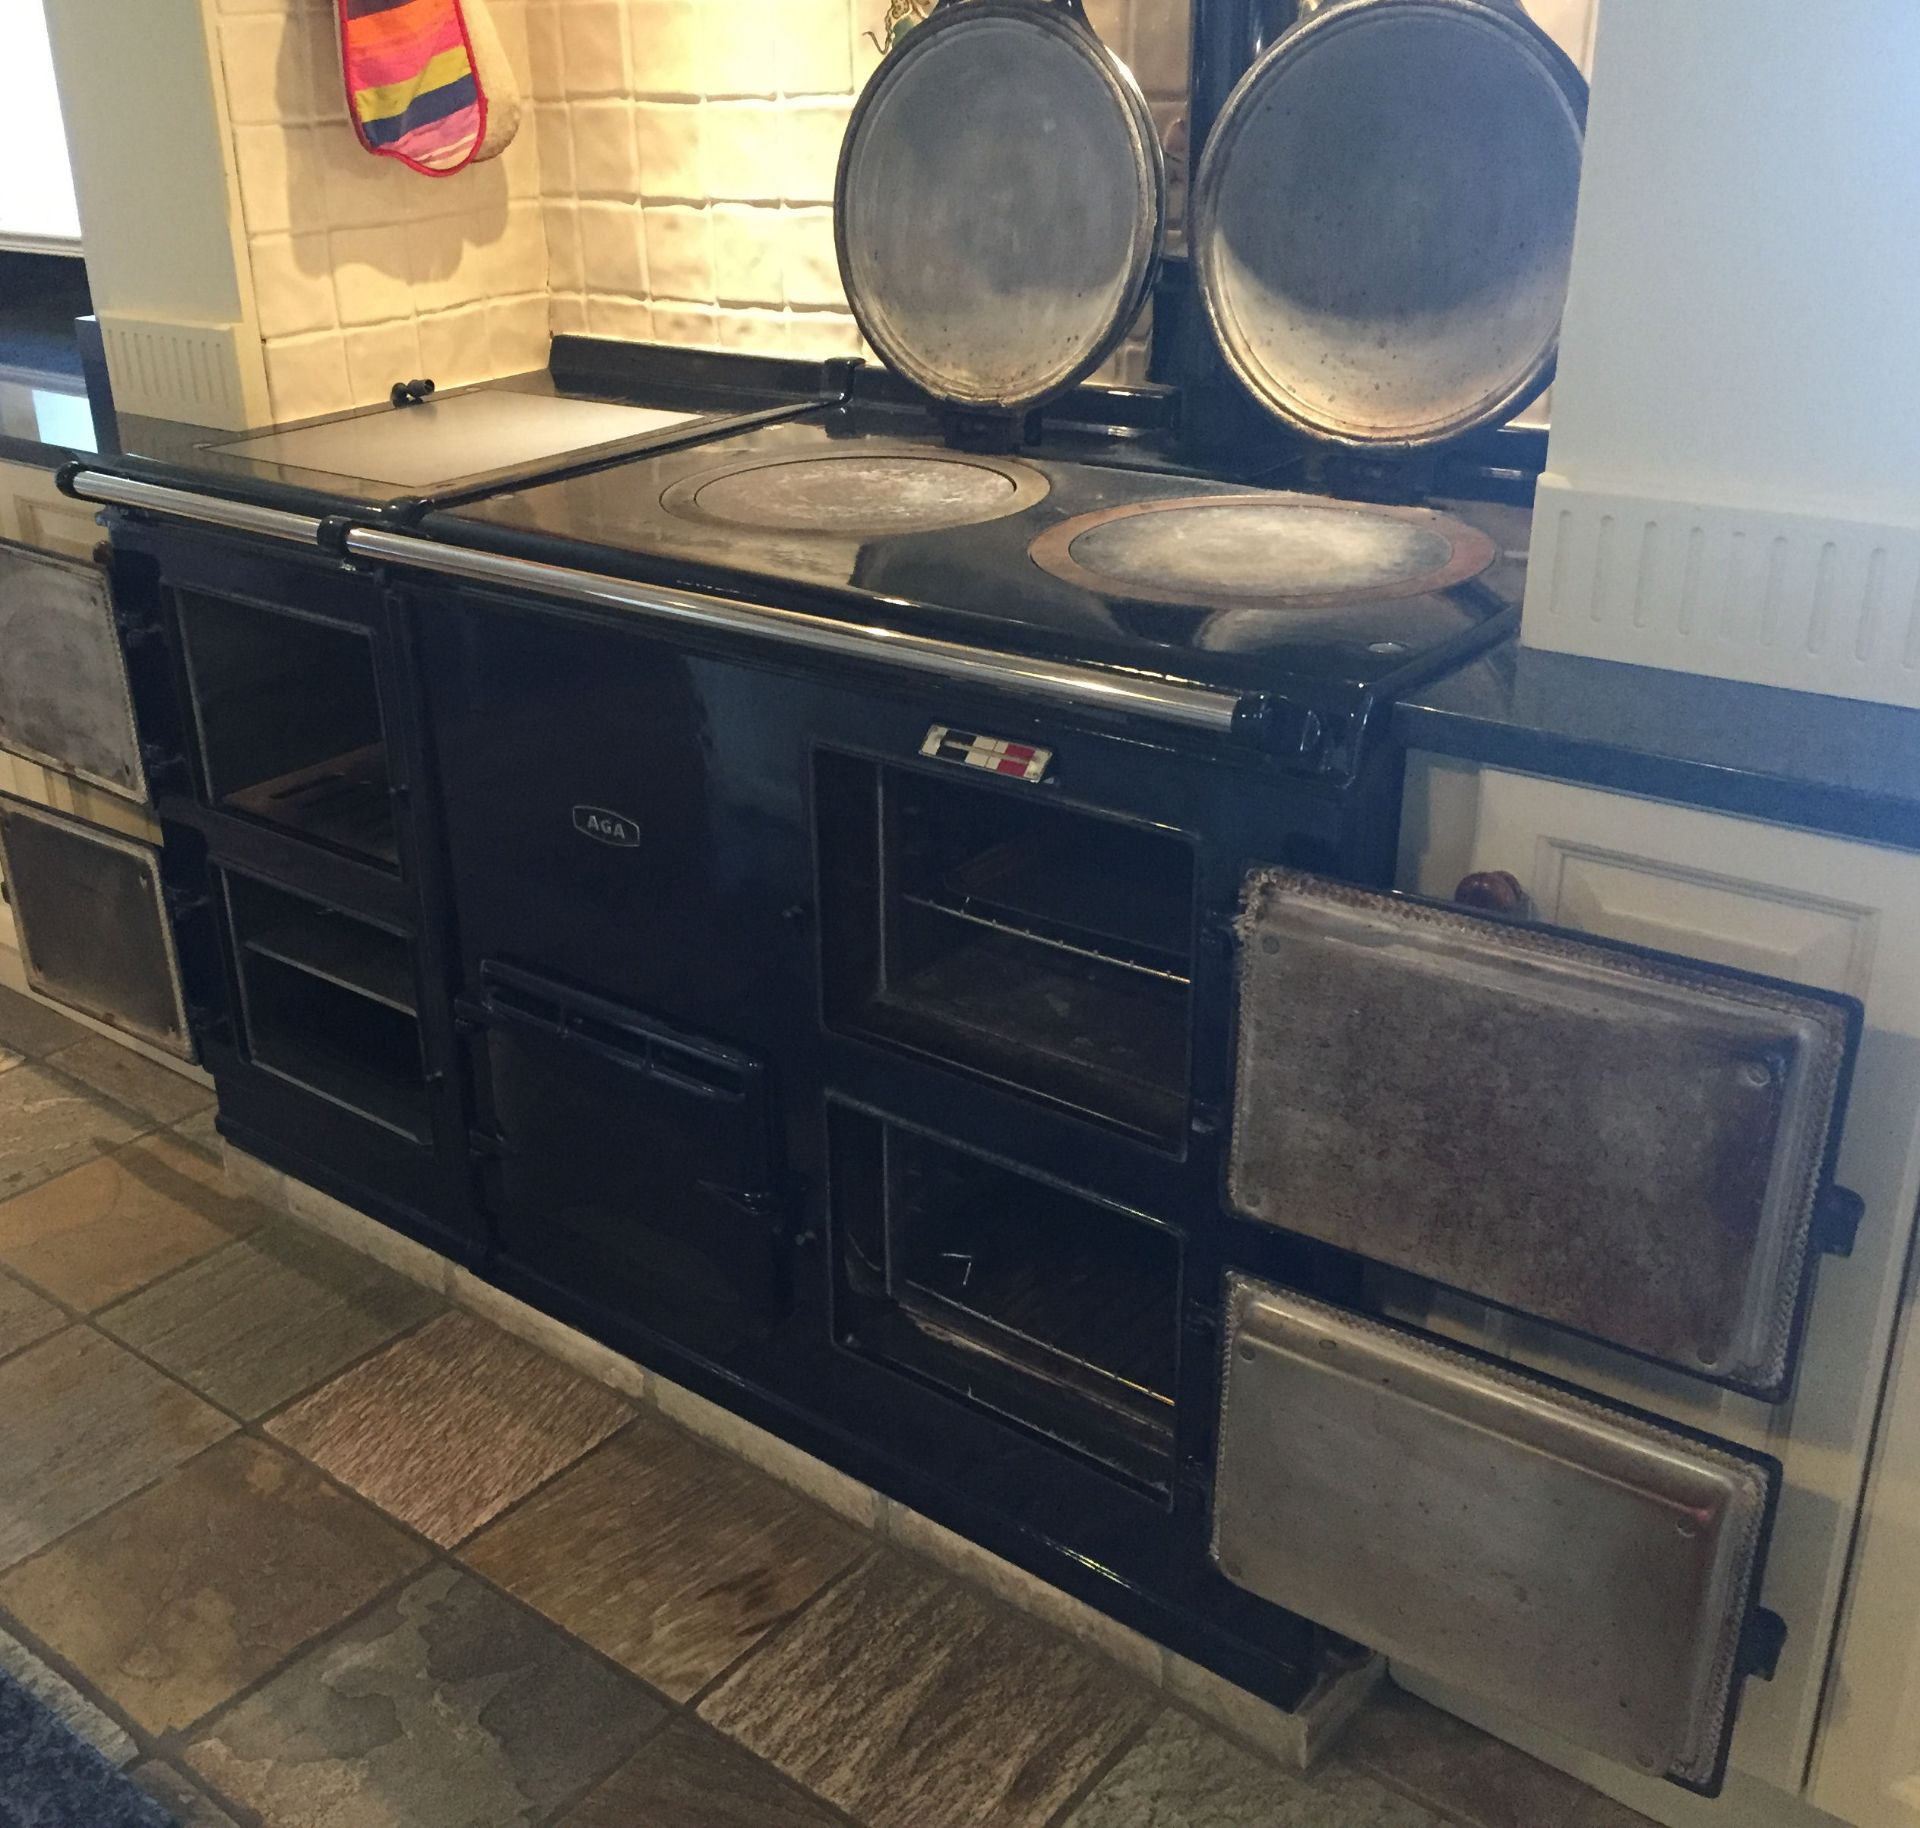 1 x Aga 4-Oven, 3-Plate Dual-Fuel Range Cooker - Cast Iron With Navy Enamel Finish With A Black - Image 8 of 21